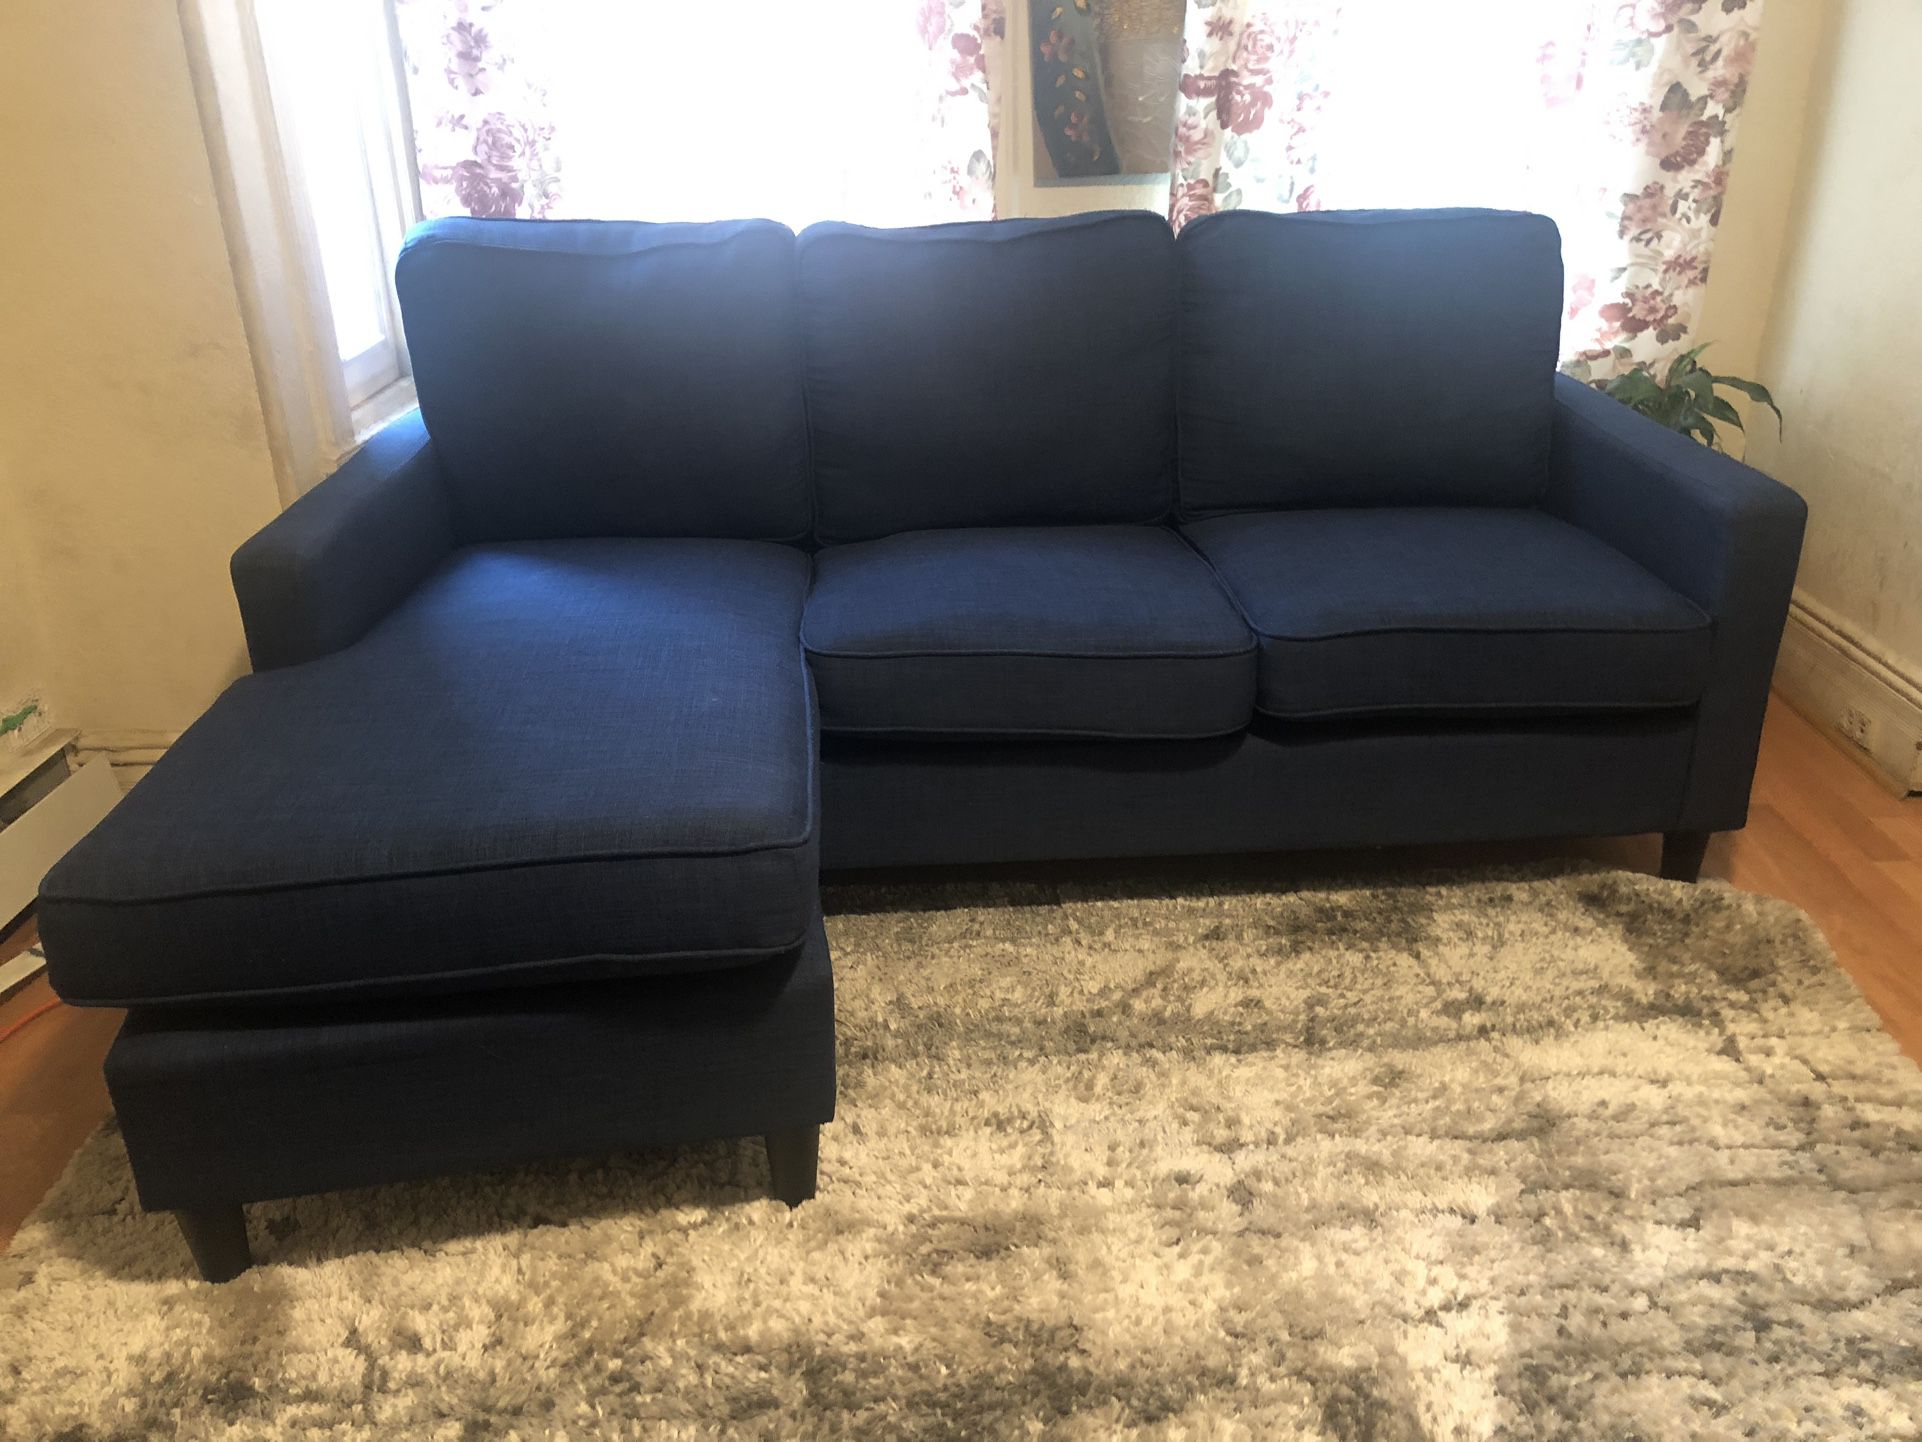 FREE DELIVERY!!!  Blue Reversible Sectional Sofa (L-shaped Couch with Ottoman )